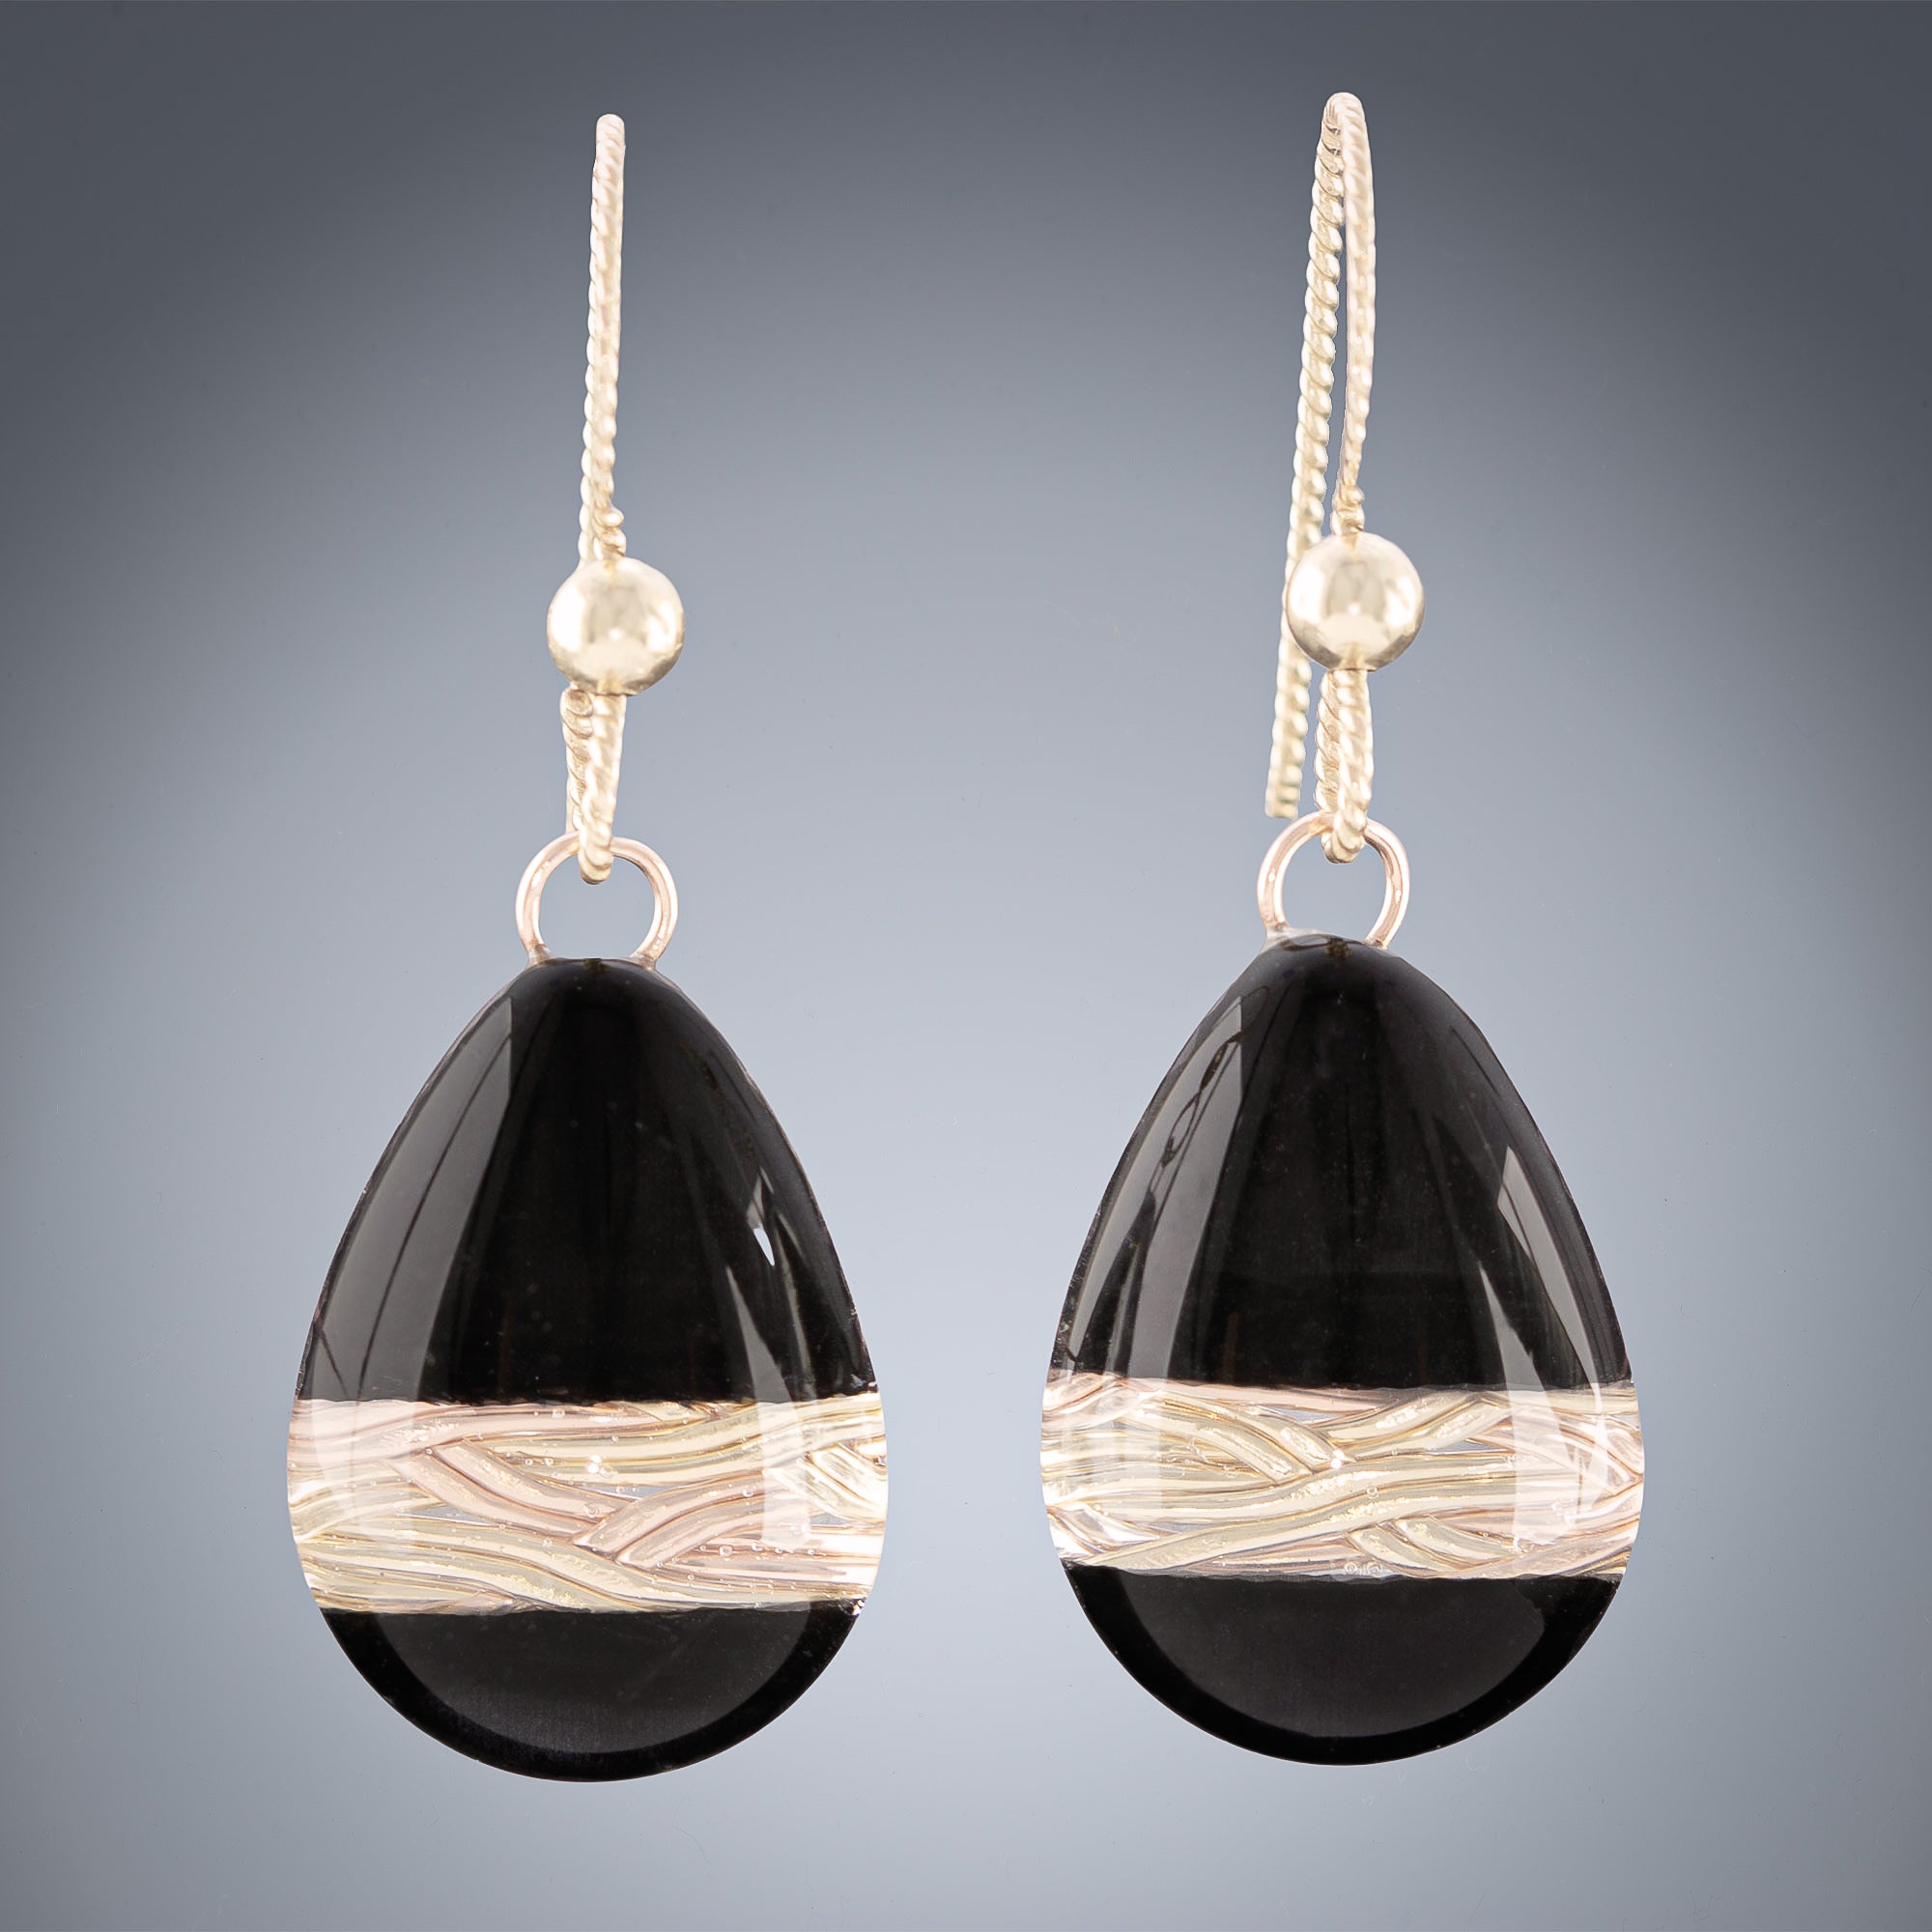 Handwoven Gold and Black Enamel Teardrop Dangle Earrings in both 14K Yellow and Rose Gold Fill